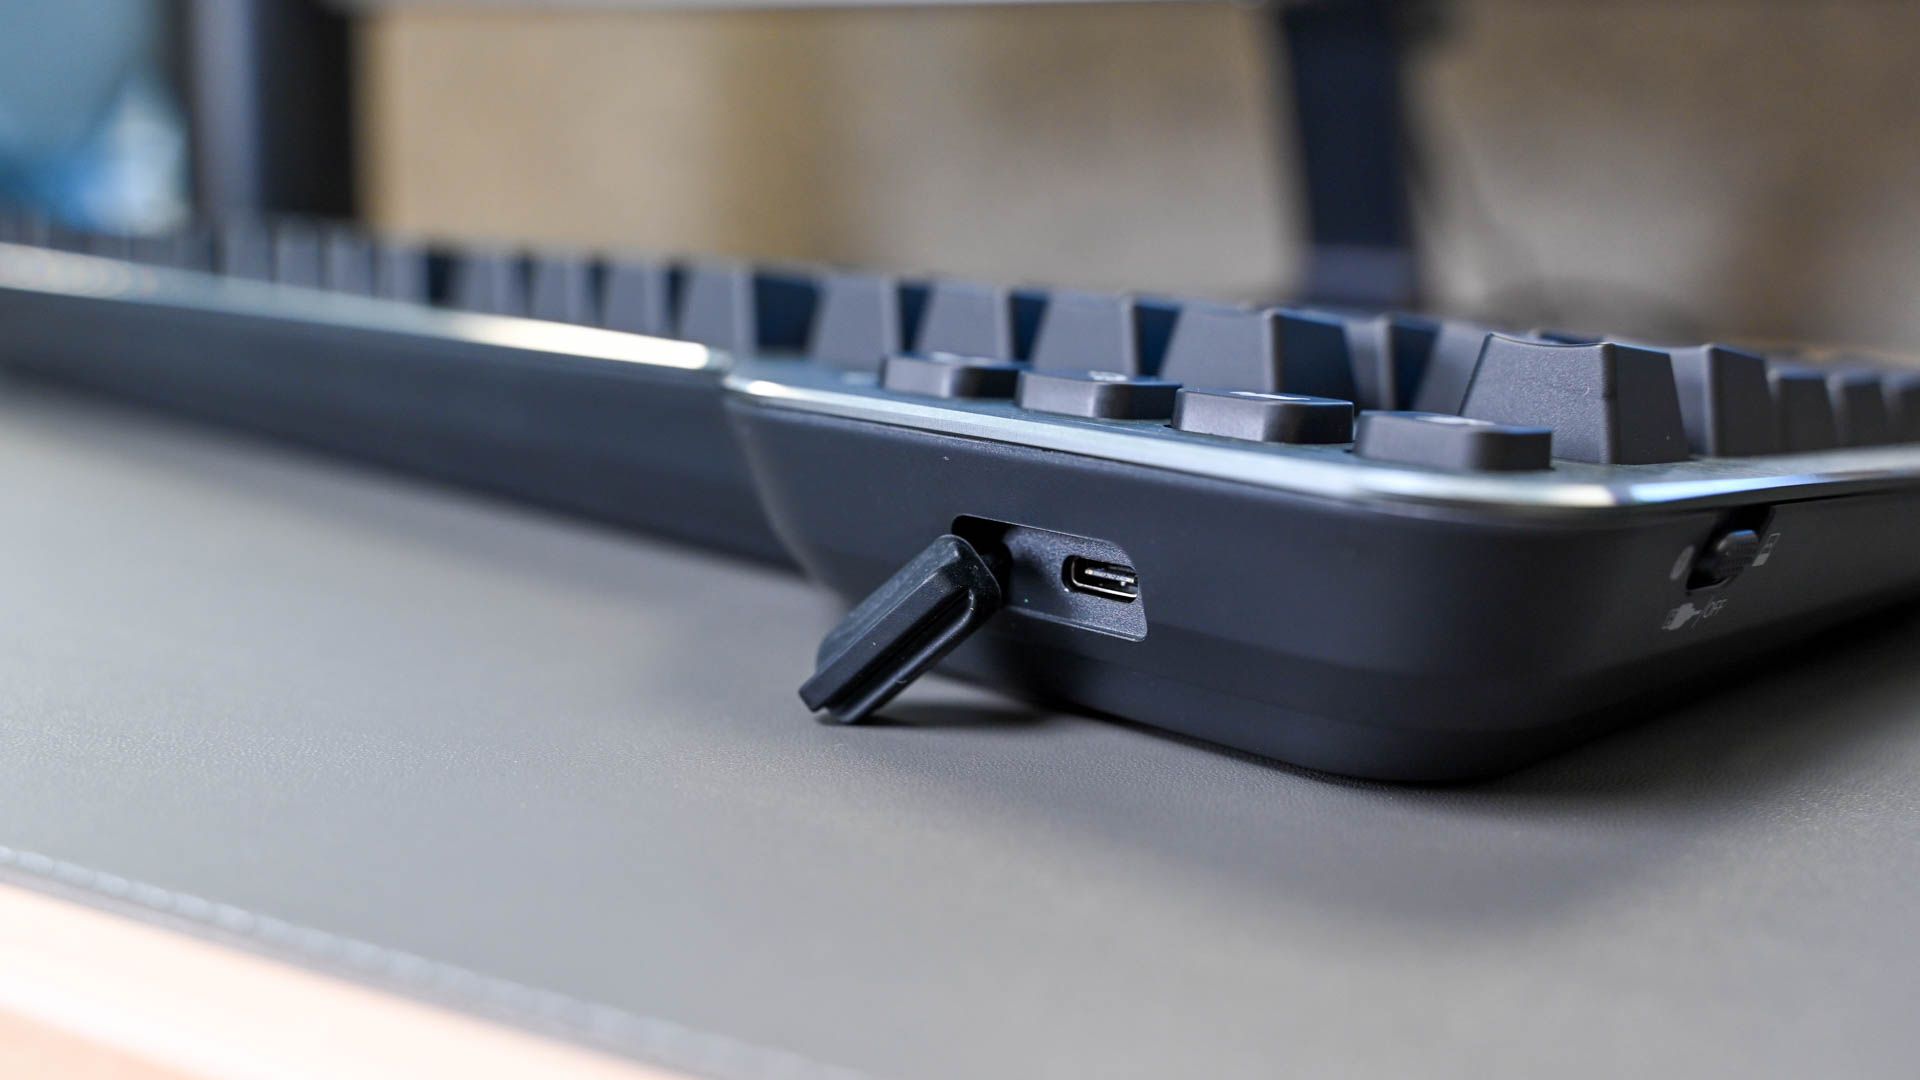 Kensington QuietType Pro keyboard showing the charging/wired USB-C port and three-position switch